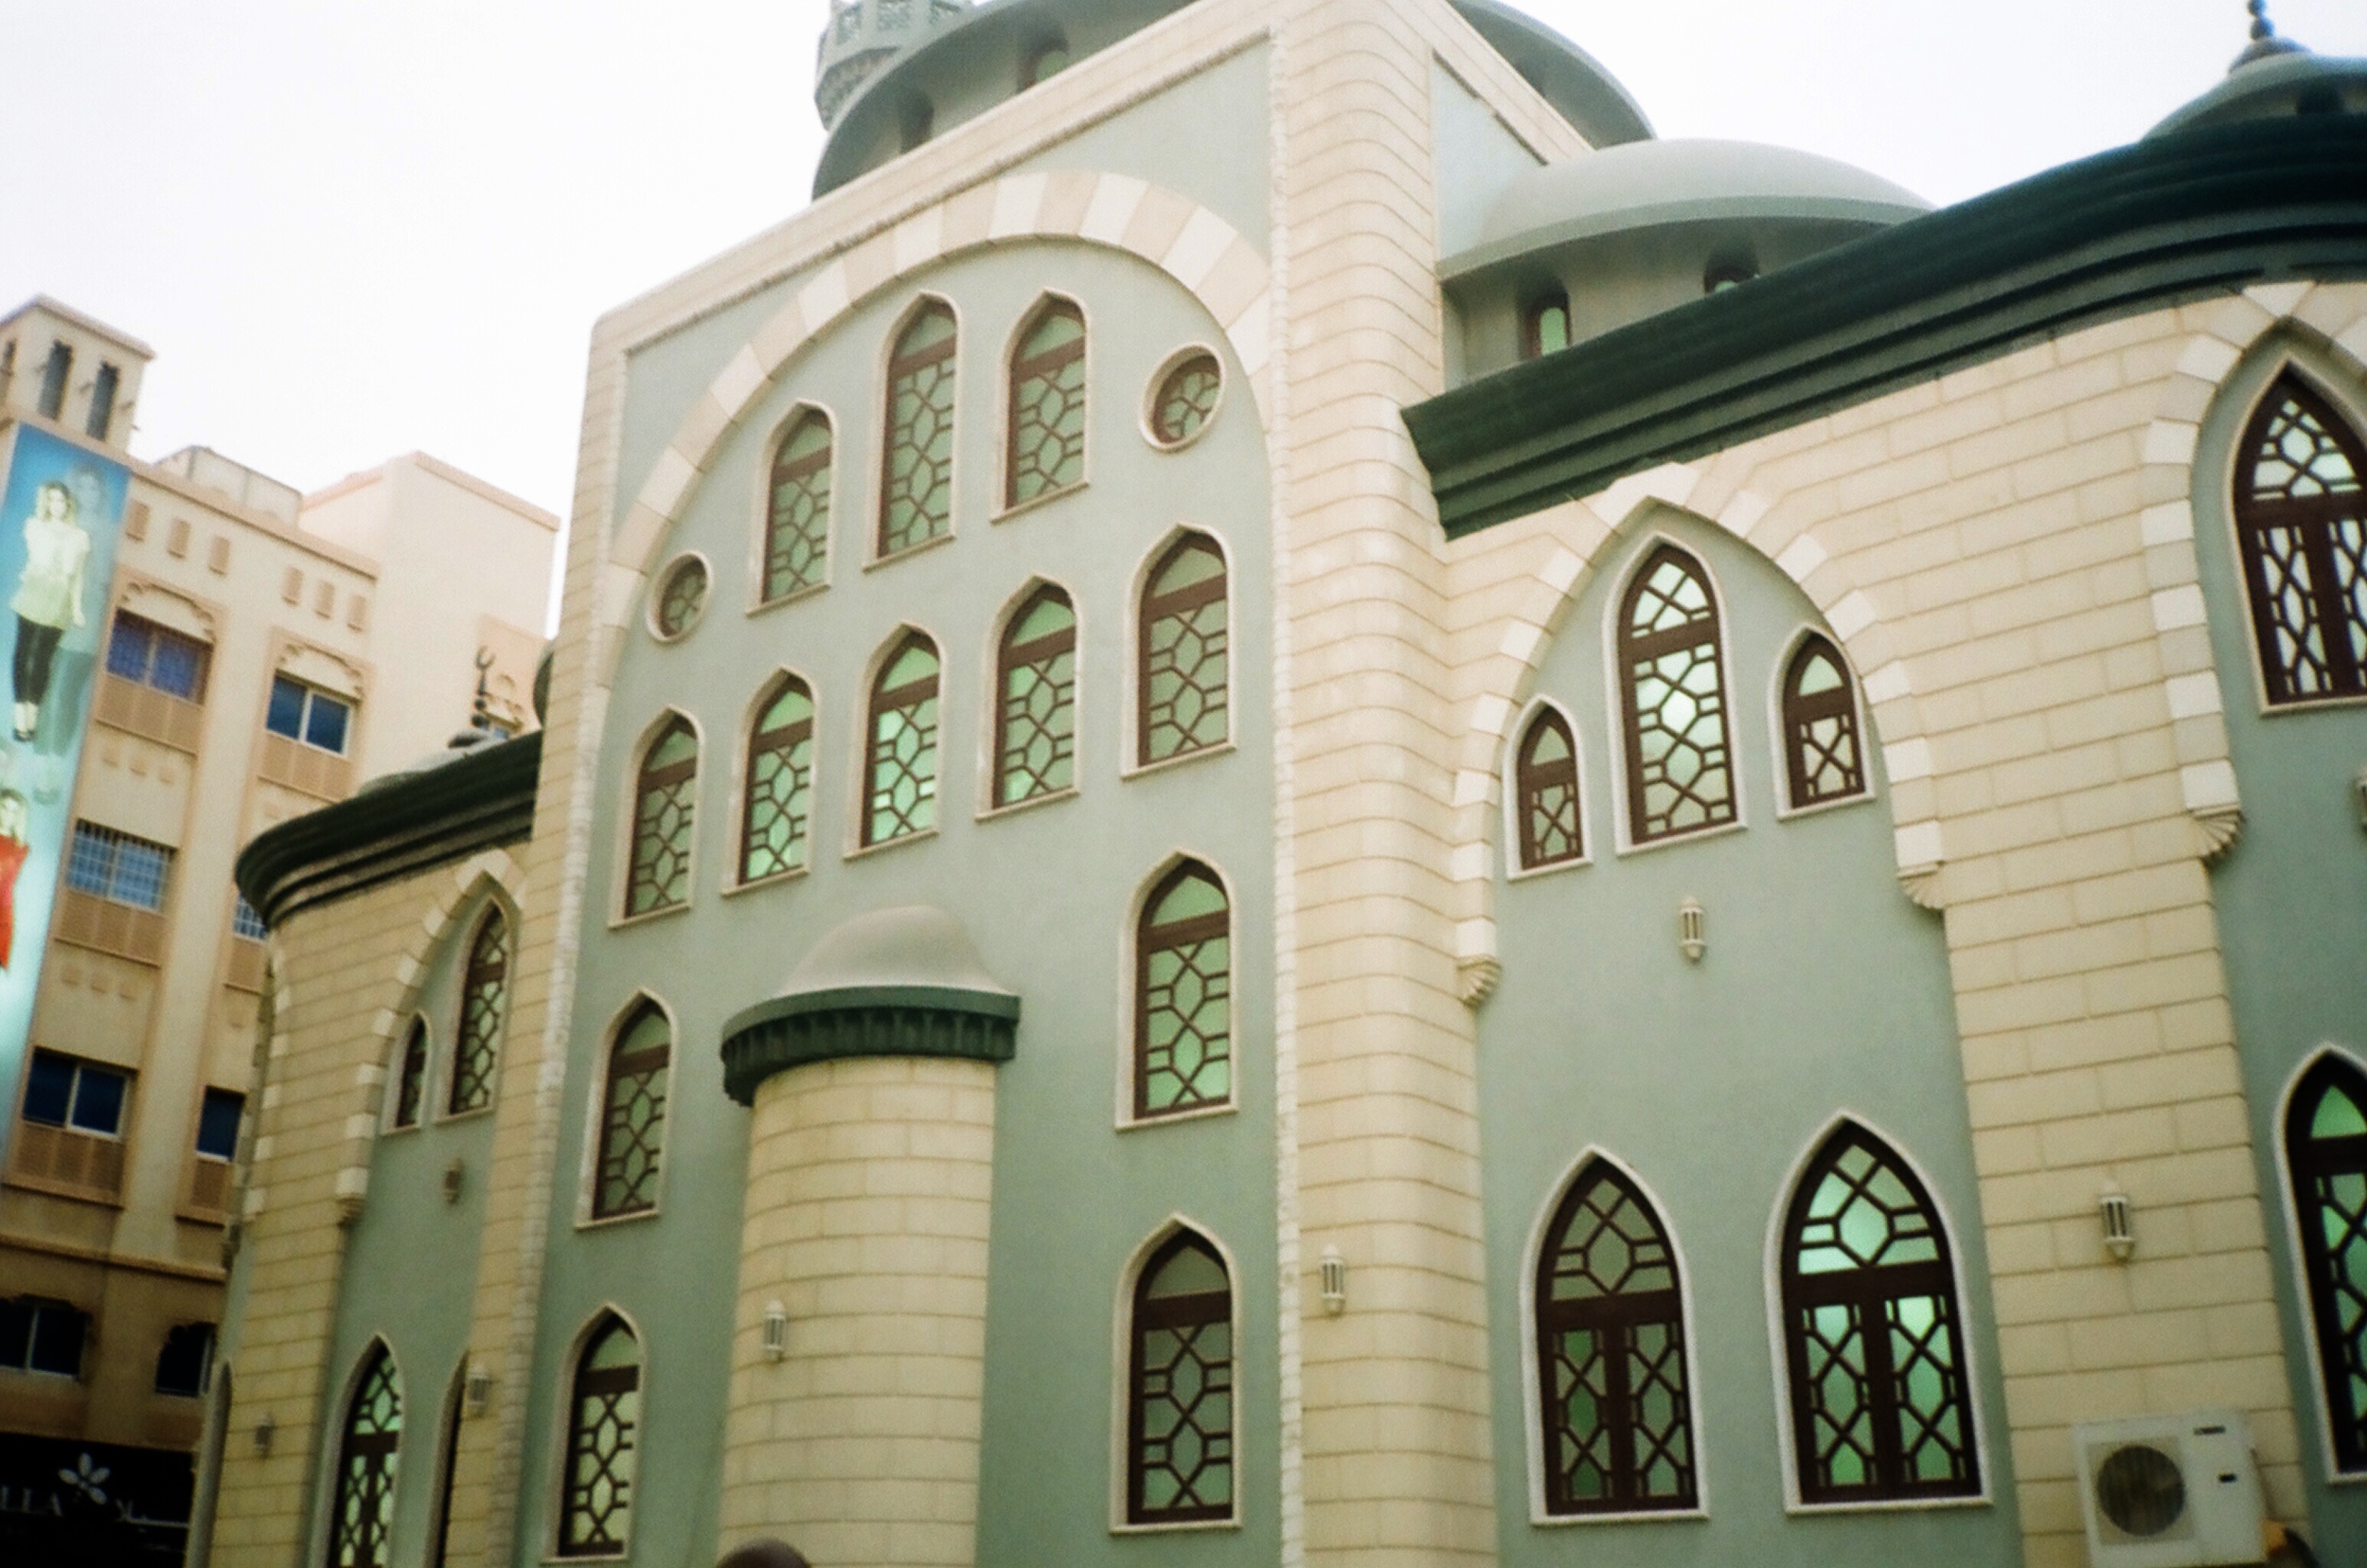 this mosque had the nicest colors